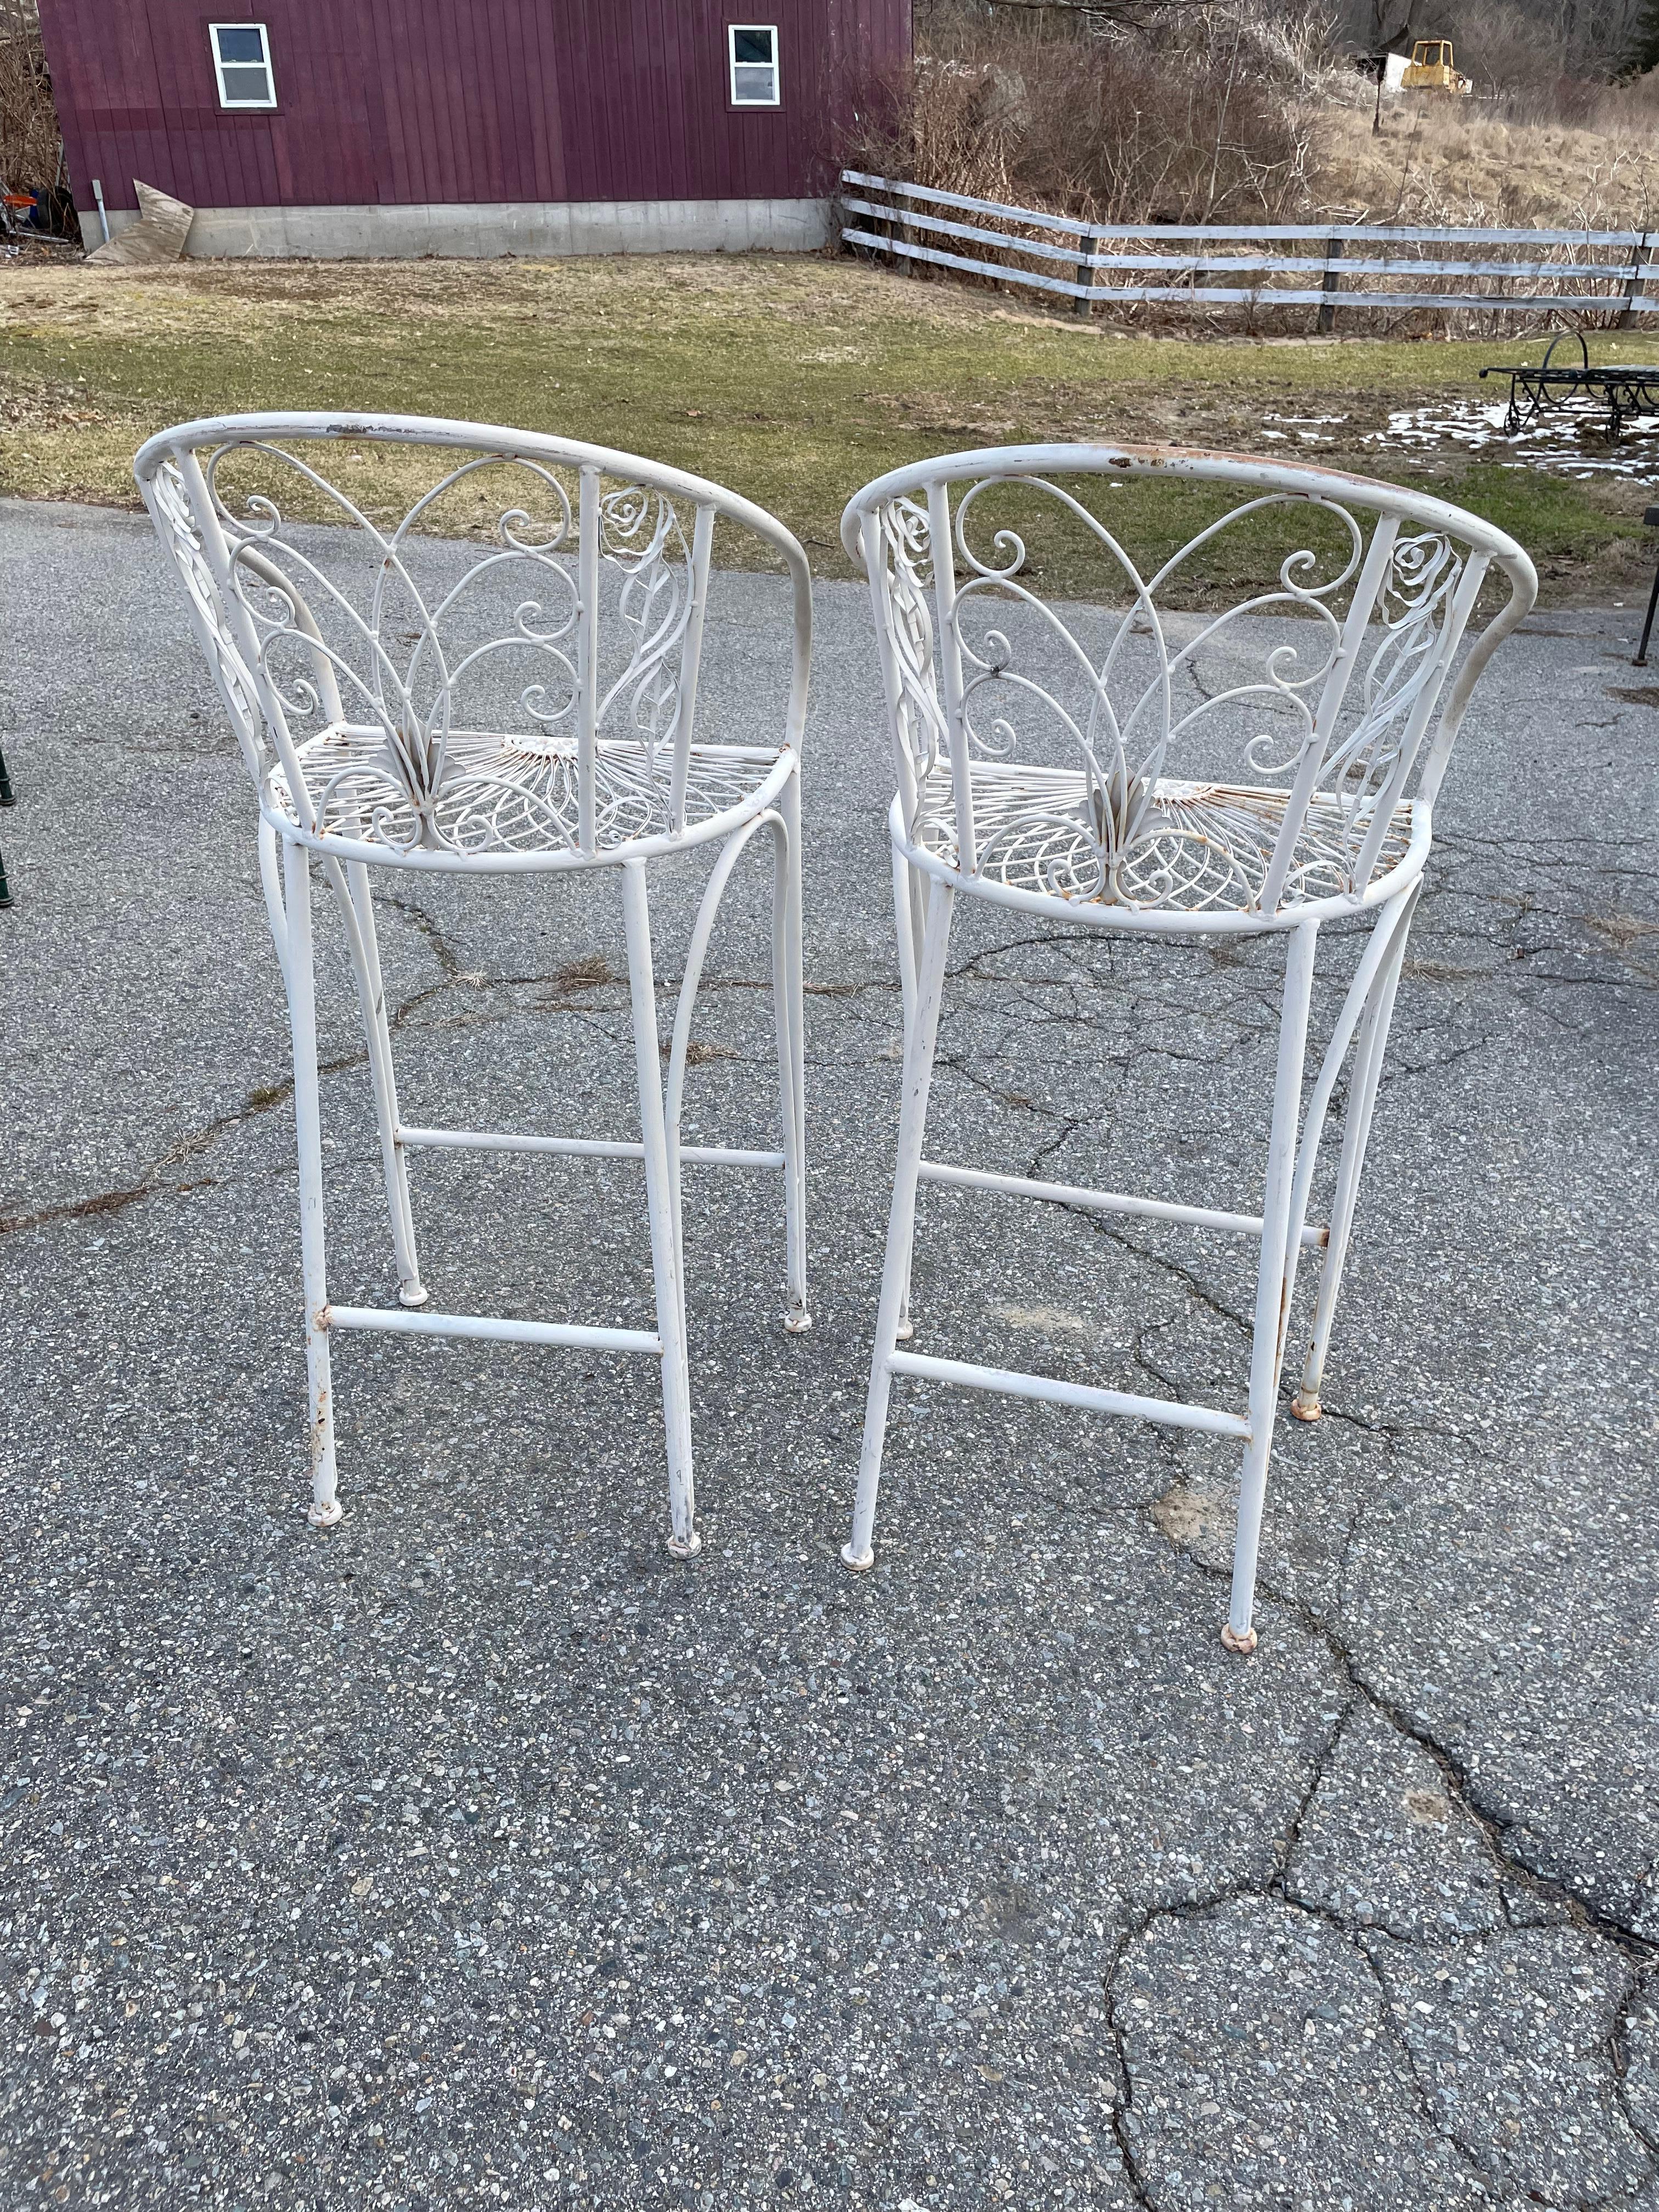 Salterini Wrought Iron Seating
For your consideration is a beautiful pair of bar stools with ornate rose and leaf detailing. Scrolled back rest and seat with detailed medallion centered in the middle with an ivory finish. Pair it perfectly with the